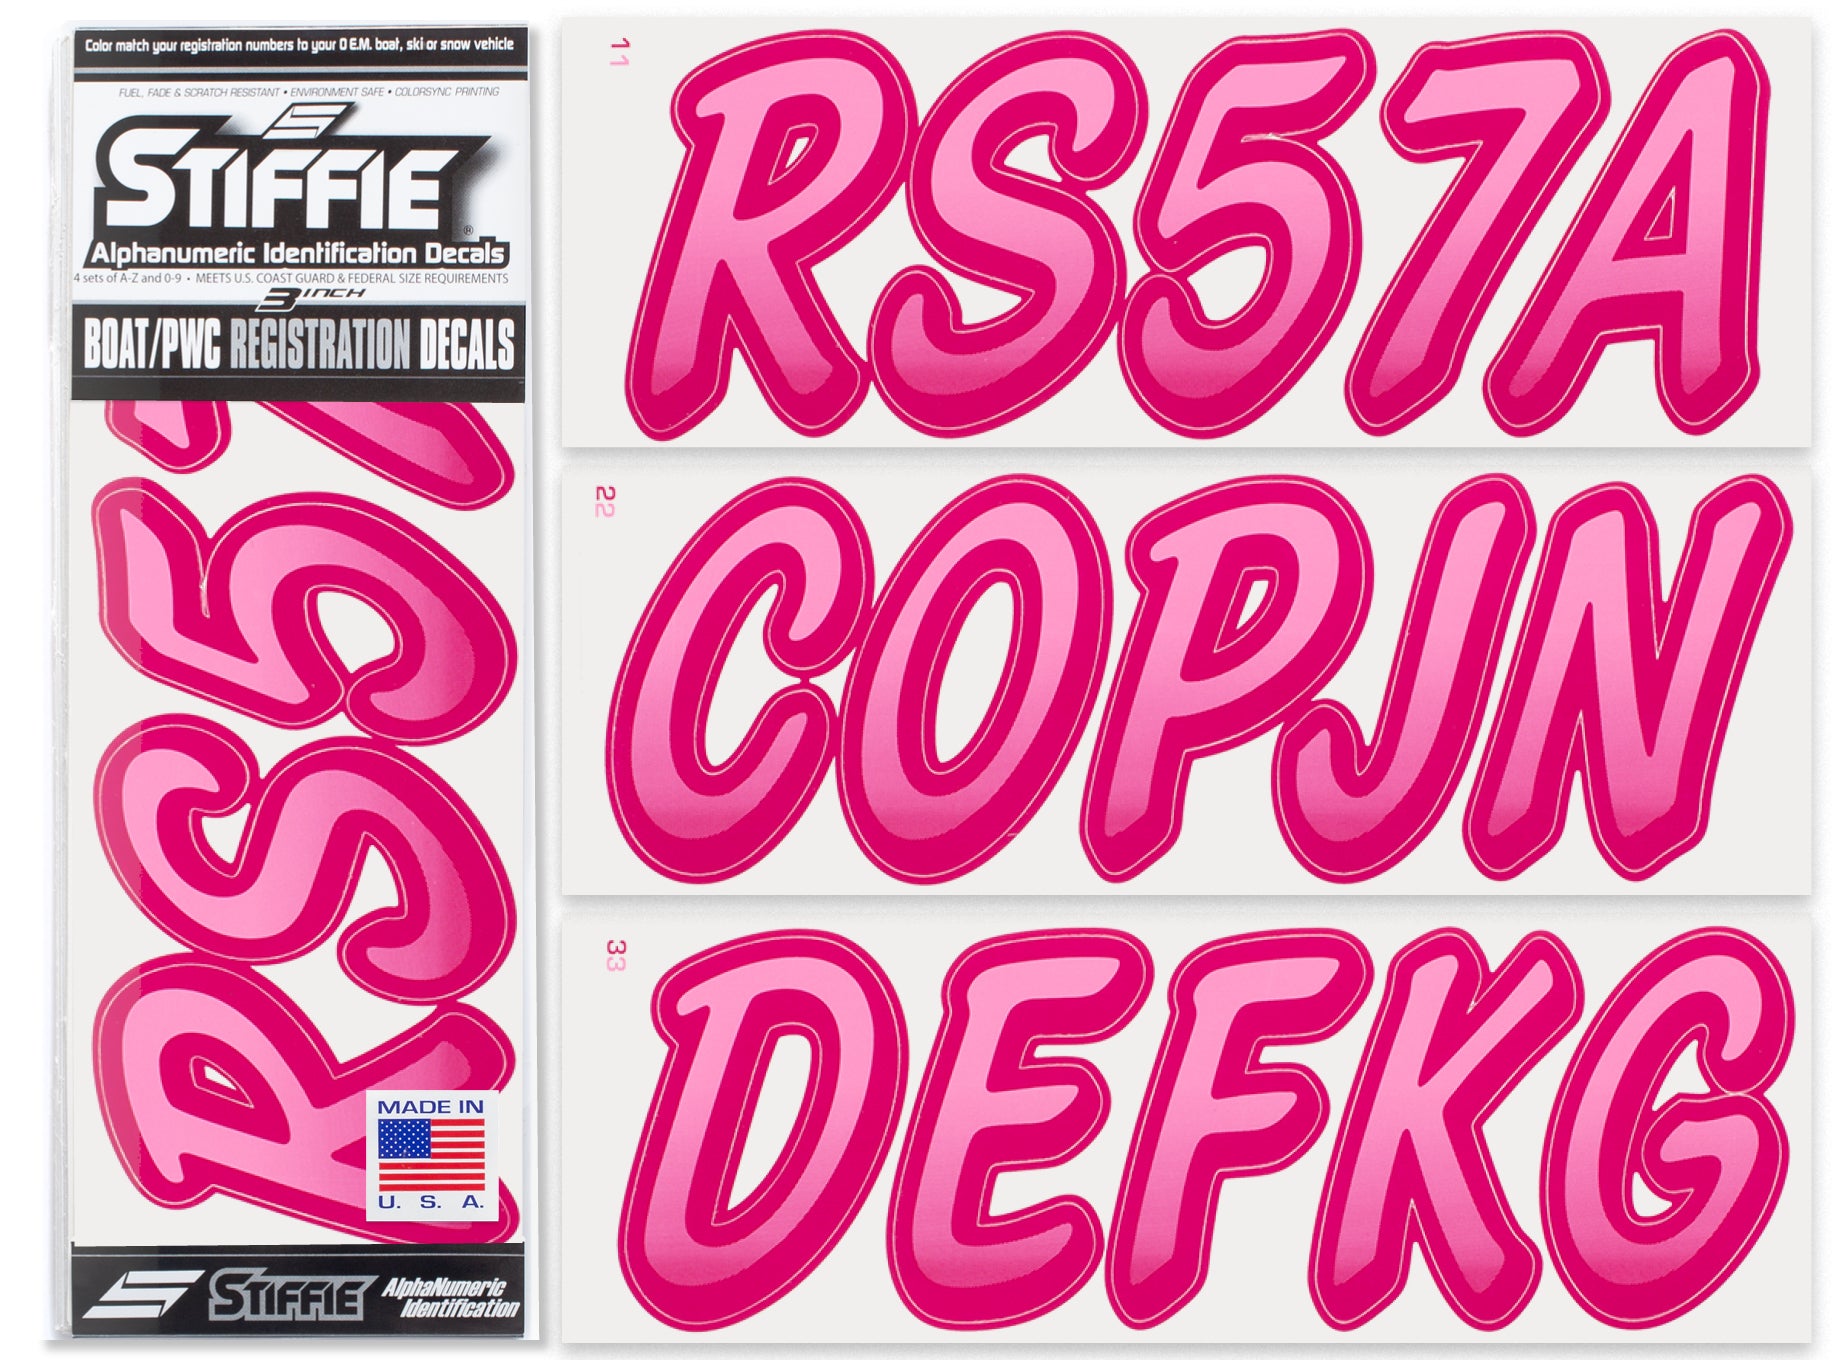 STIFFIE Whipline Pink/Berry 3" Alpha-Numeric Registration Identification Numbers Stickers Decals for Boats & Personal Watercraft